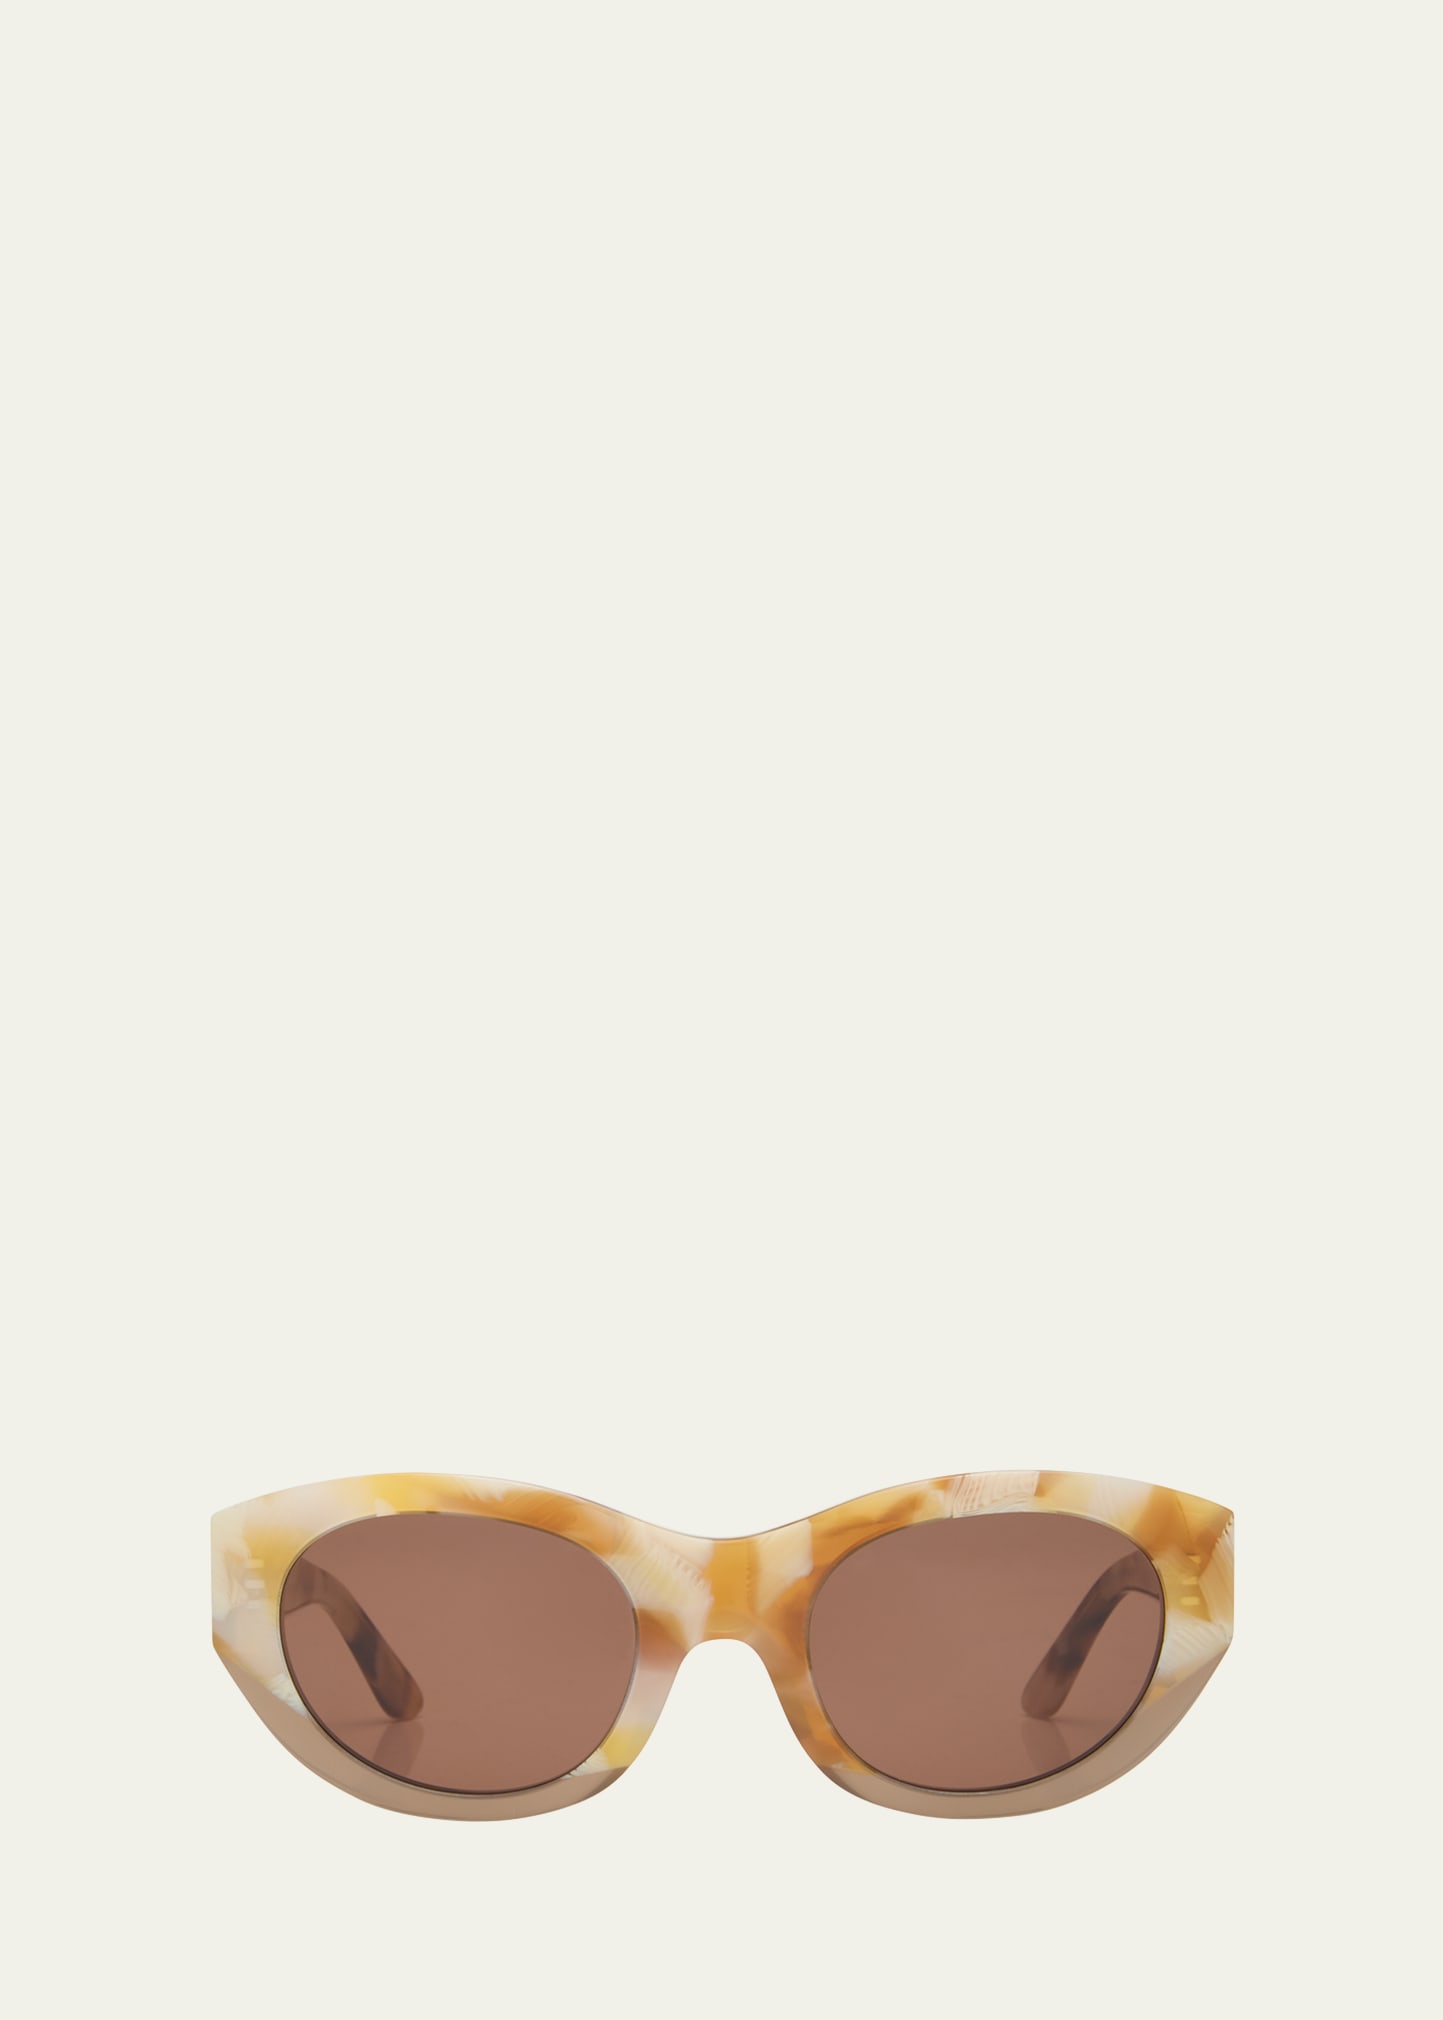 Thierry Lasry Exoty 0811 Acetate Cat-eye Sunglasses In Tortbrn